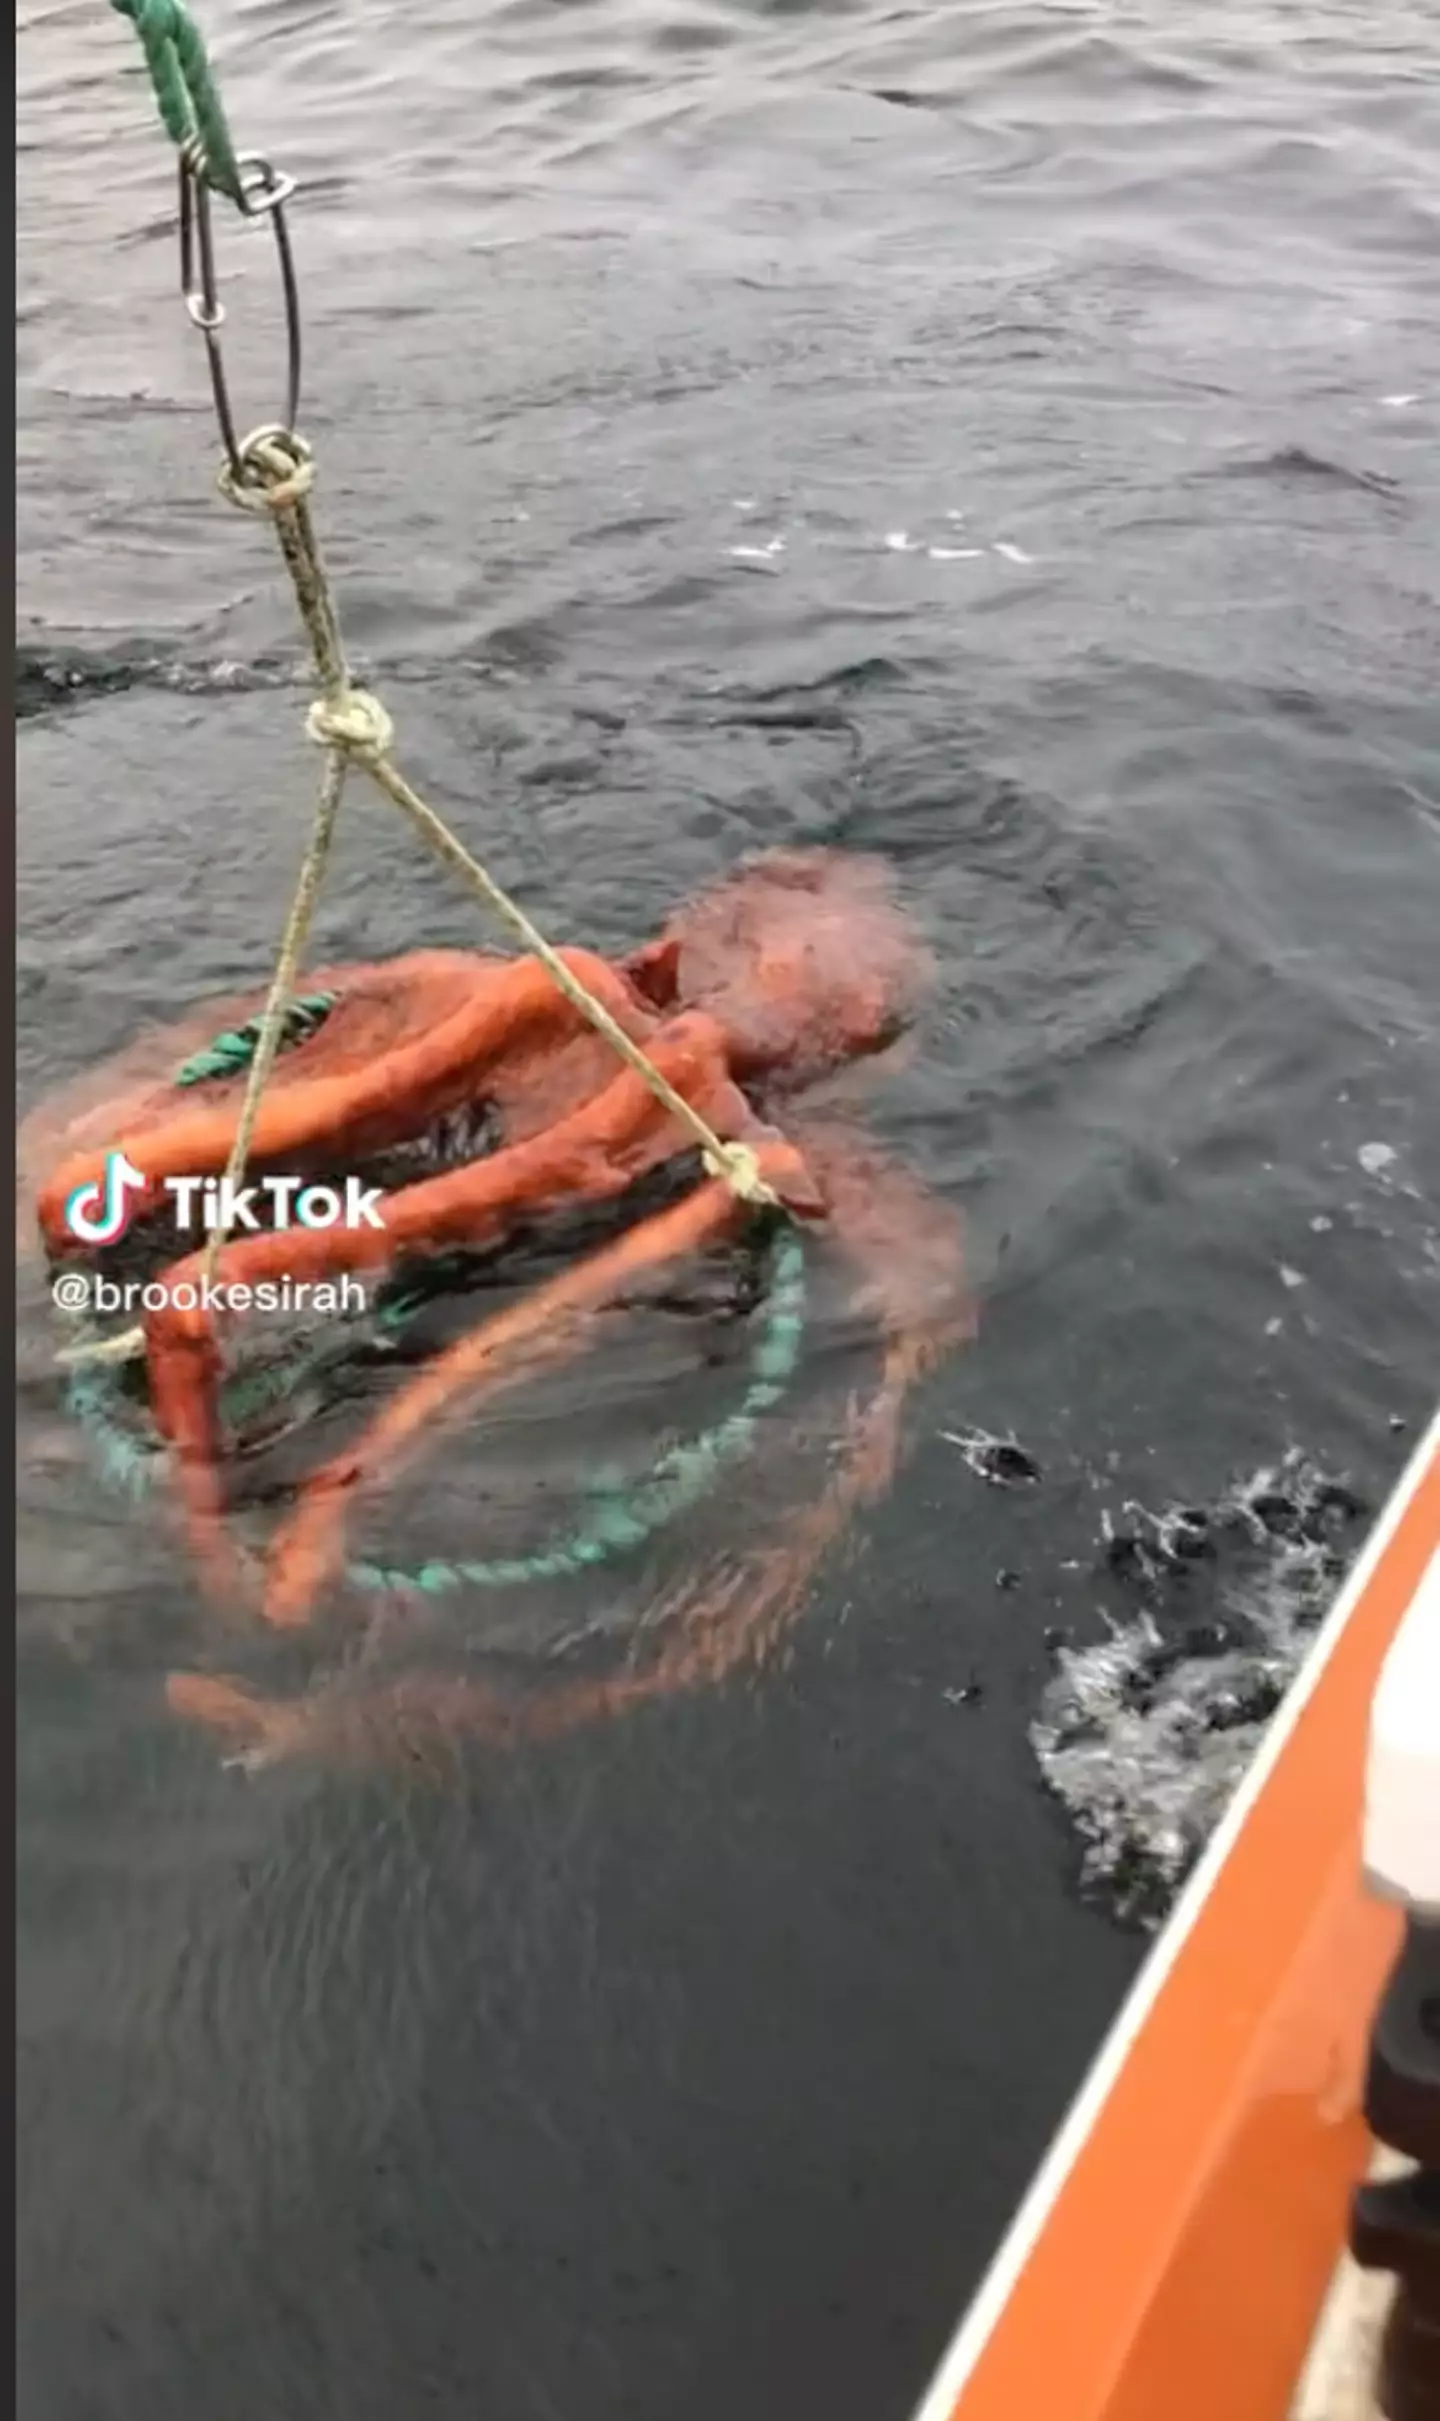 Brooke Sattar caught the giant octopus on camera.